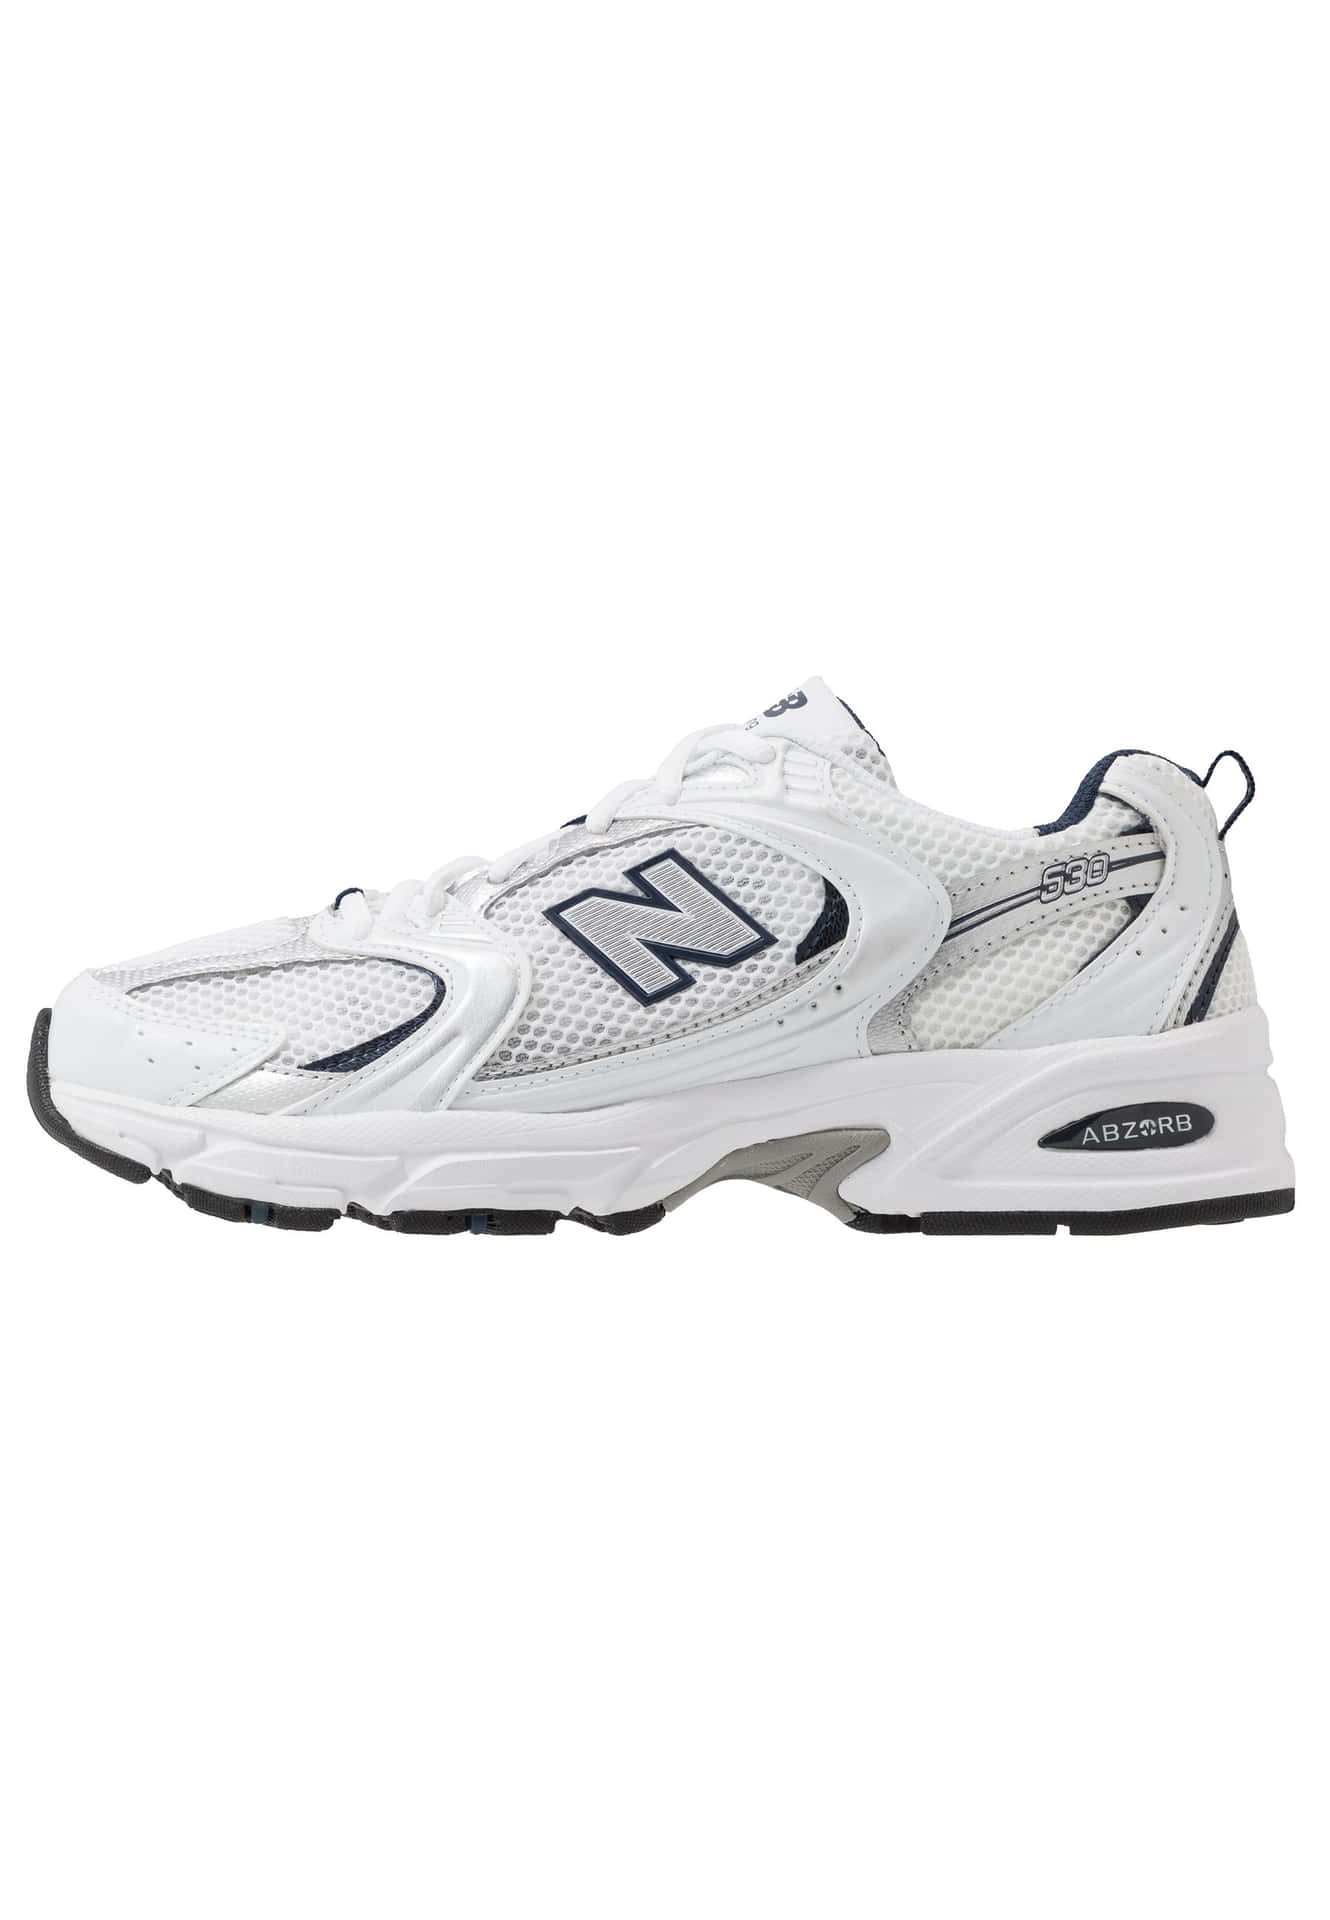 "Go Further with New Balance Comfort and Style"